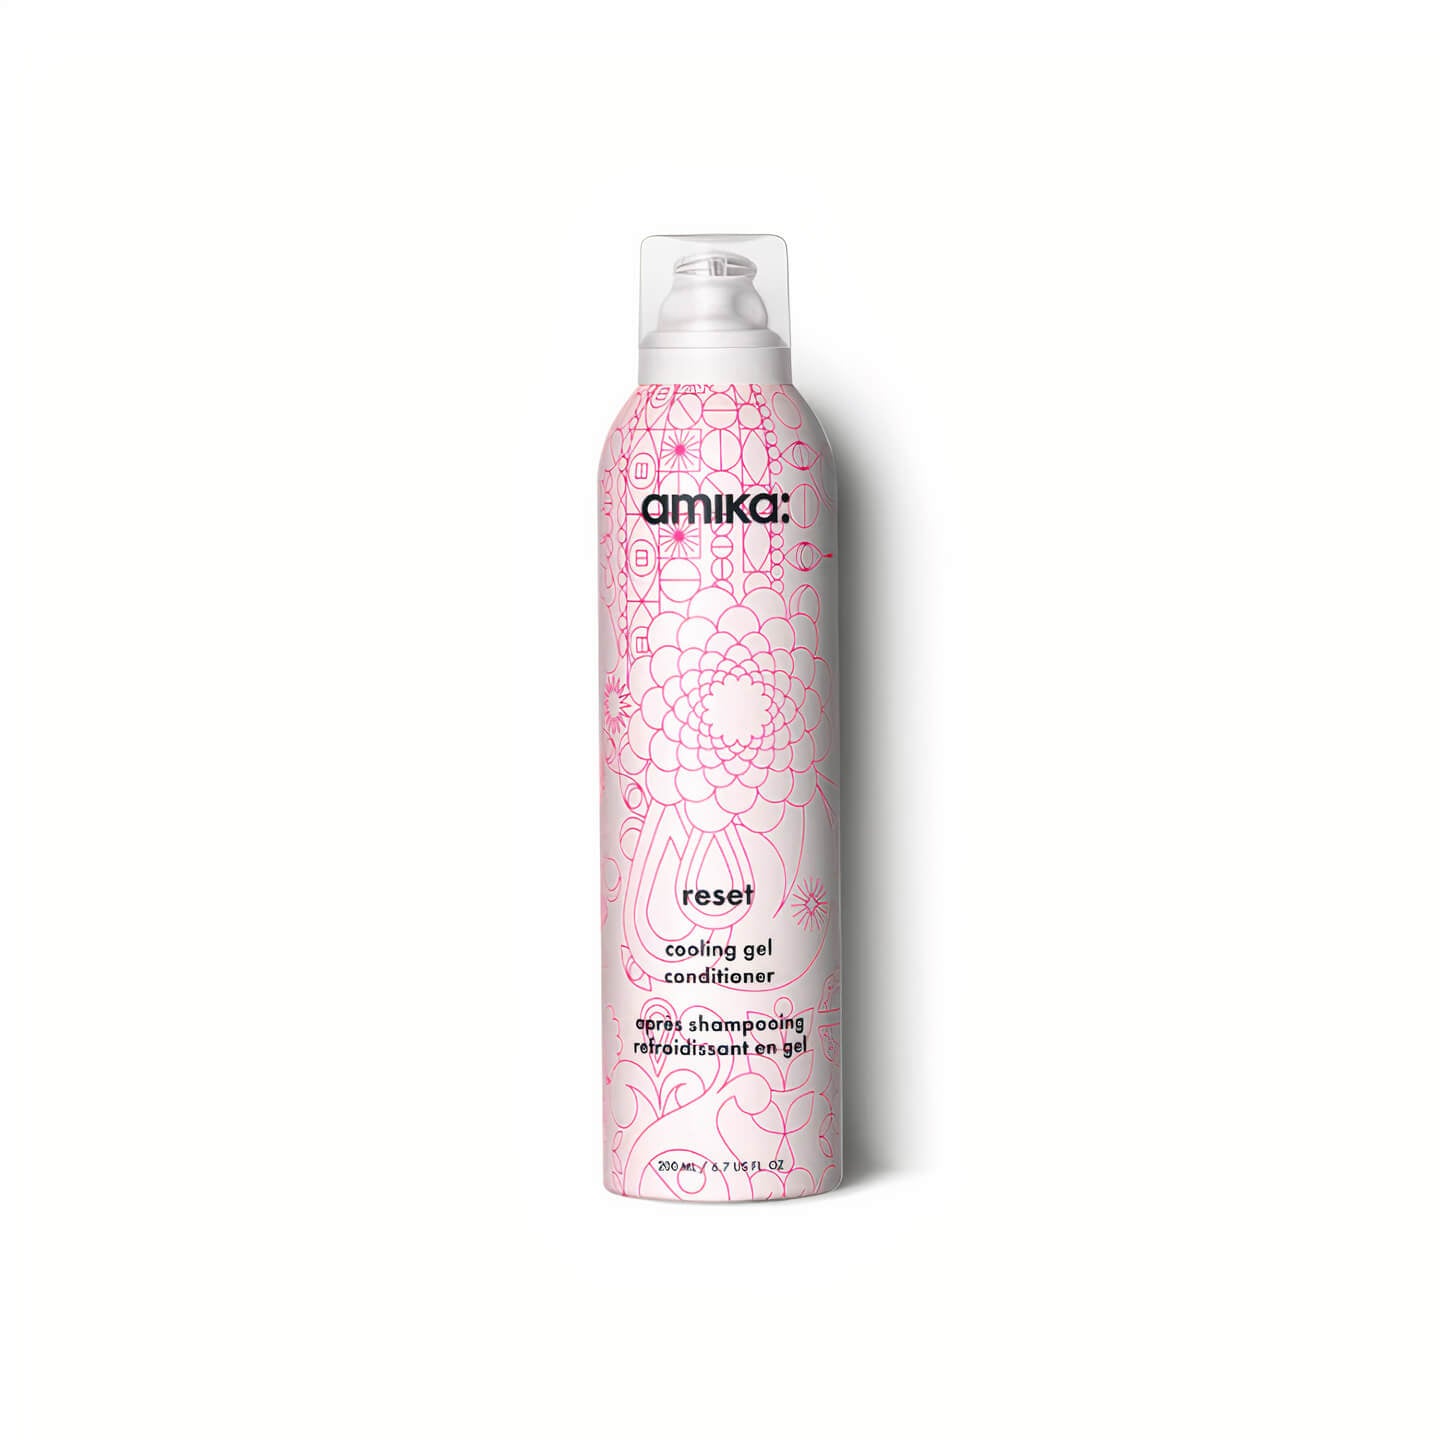 Amika: Reset Cooling Gel Conditioner